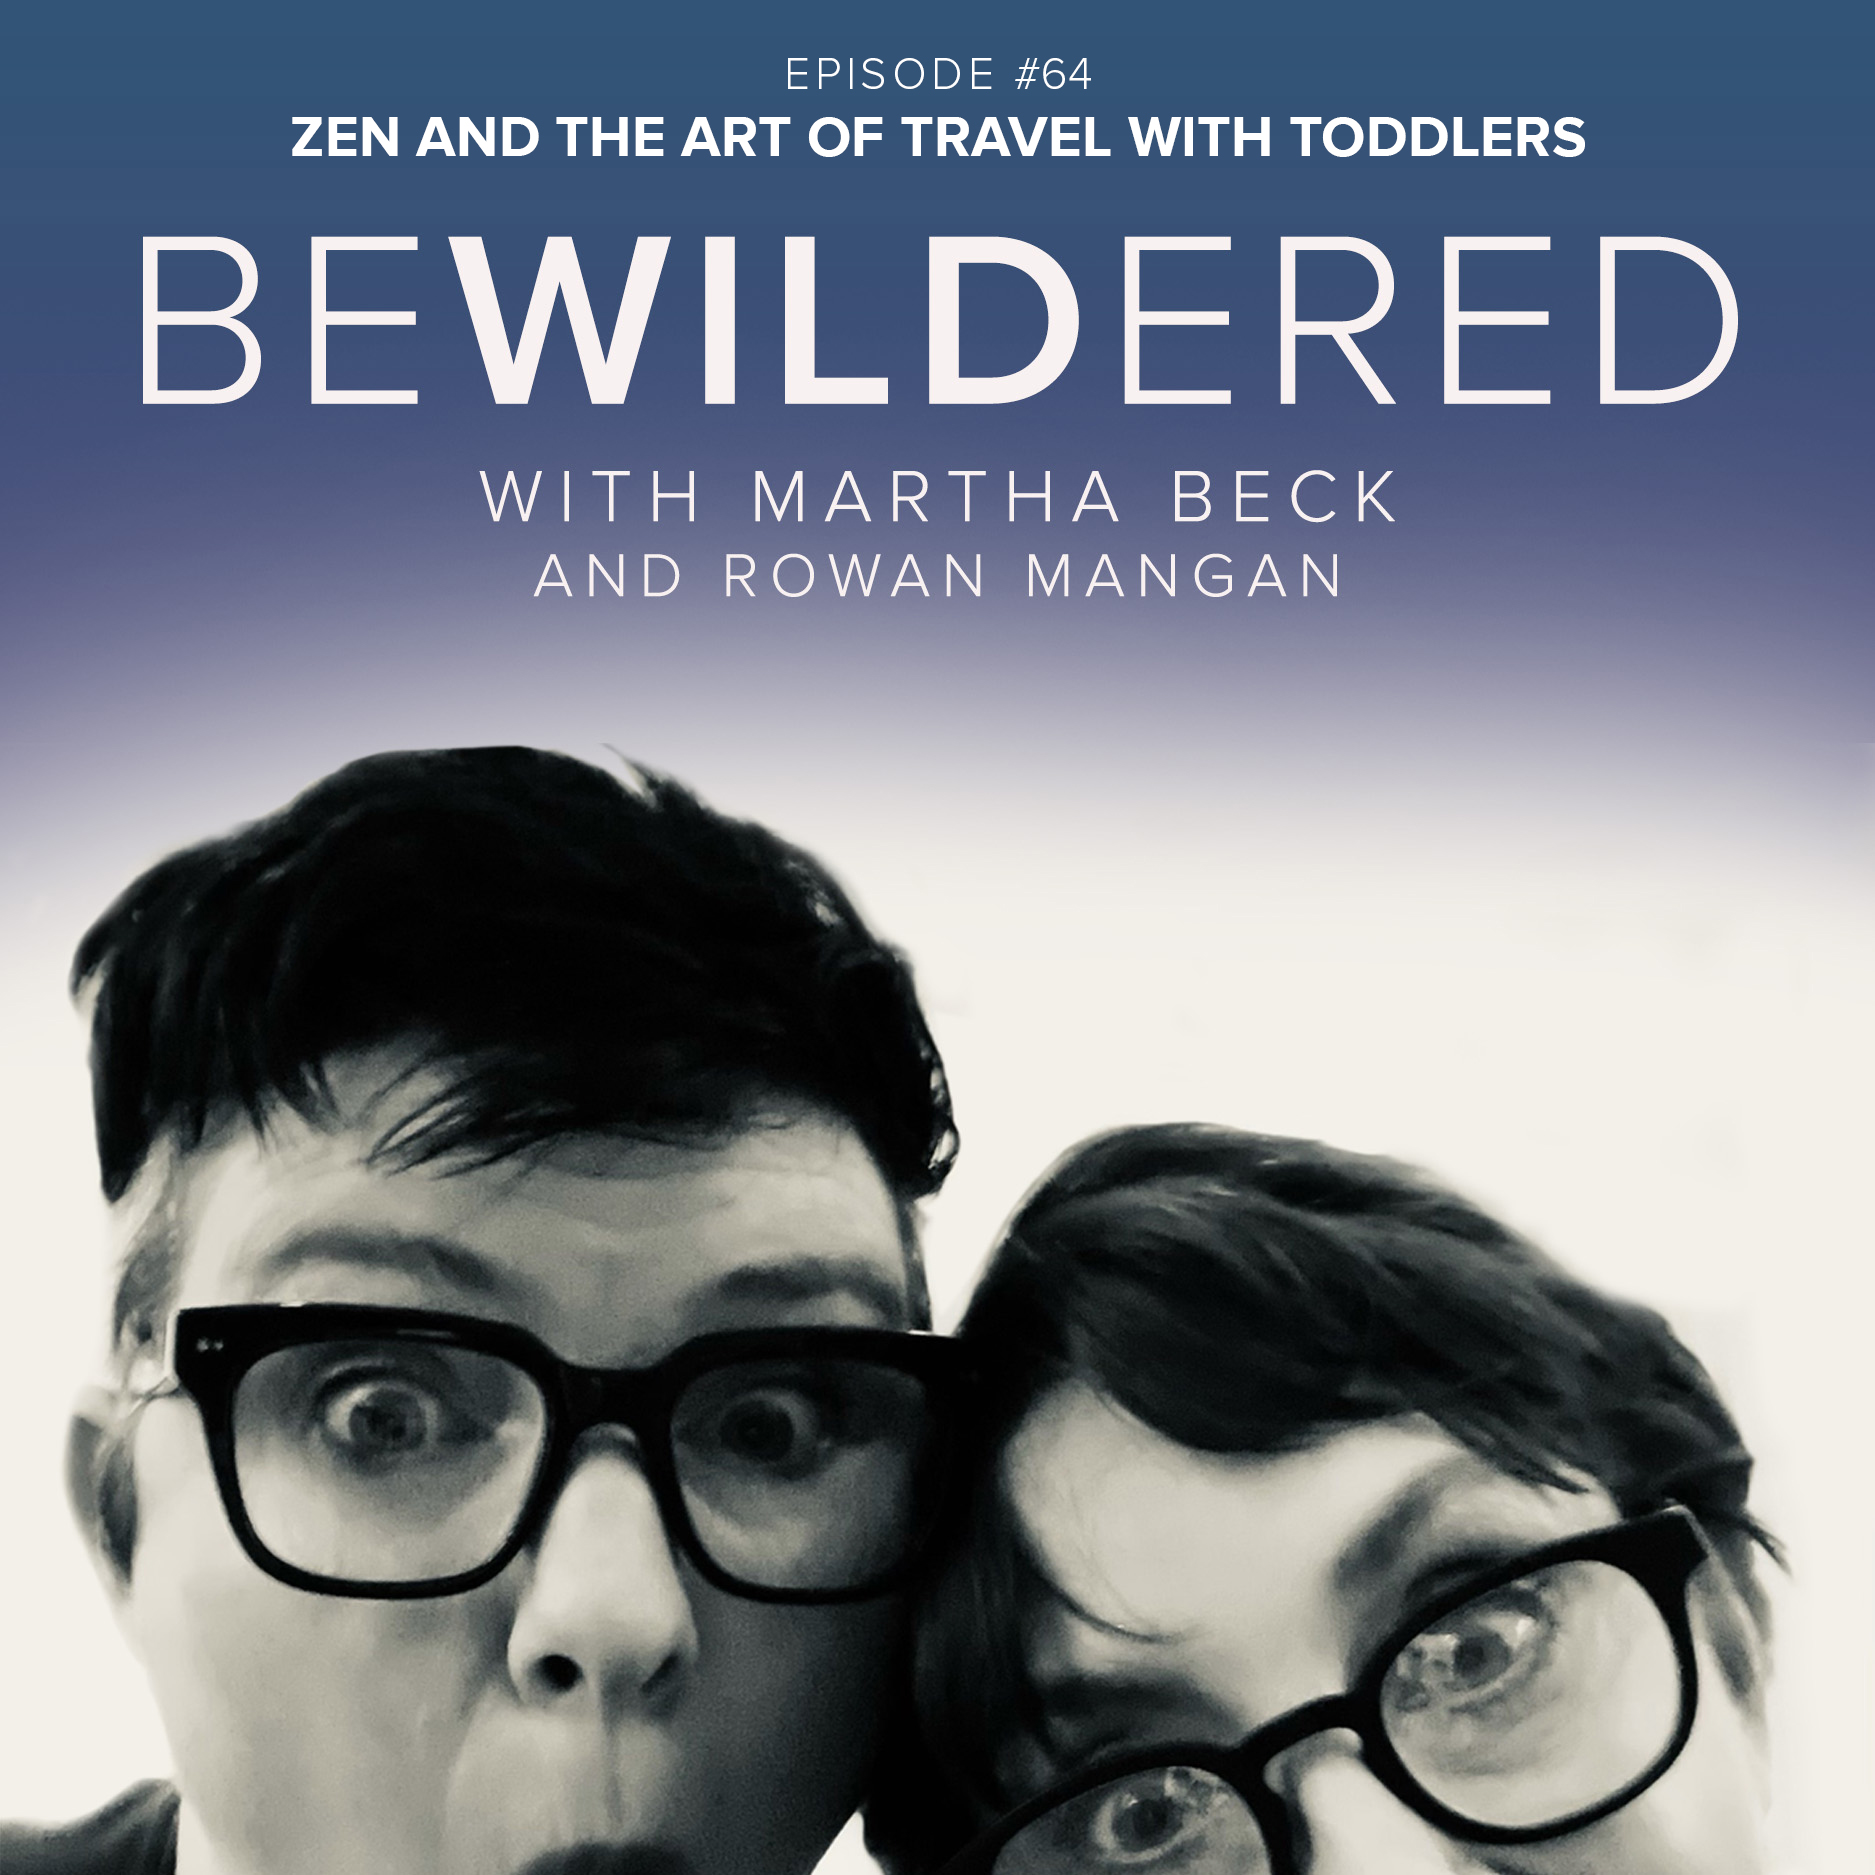 Image for Episode #64 Zen and the Art of Travel With Toddlers for the Bewildered Podcast with Martha Beck and Rowan Mangan